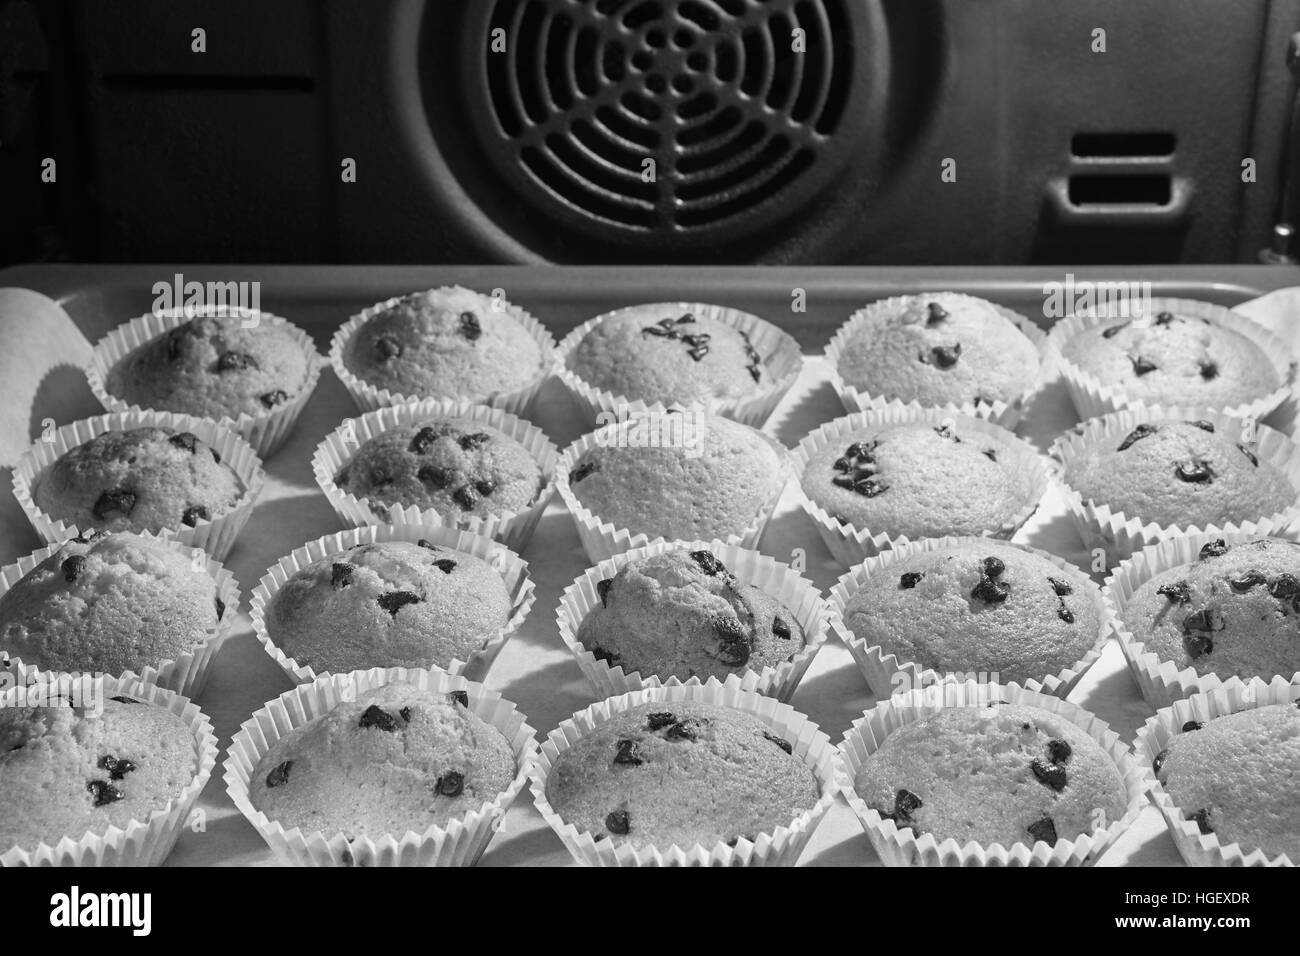 Cupcakes with chocolate inside an oven with fan. Horizontal Stock Photo